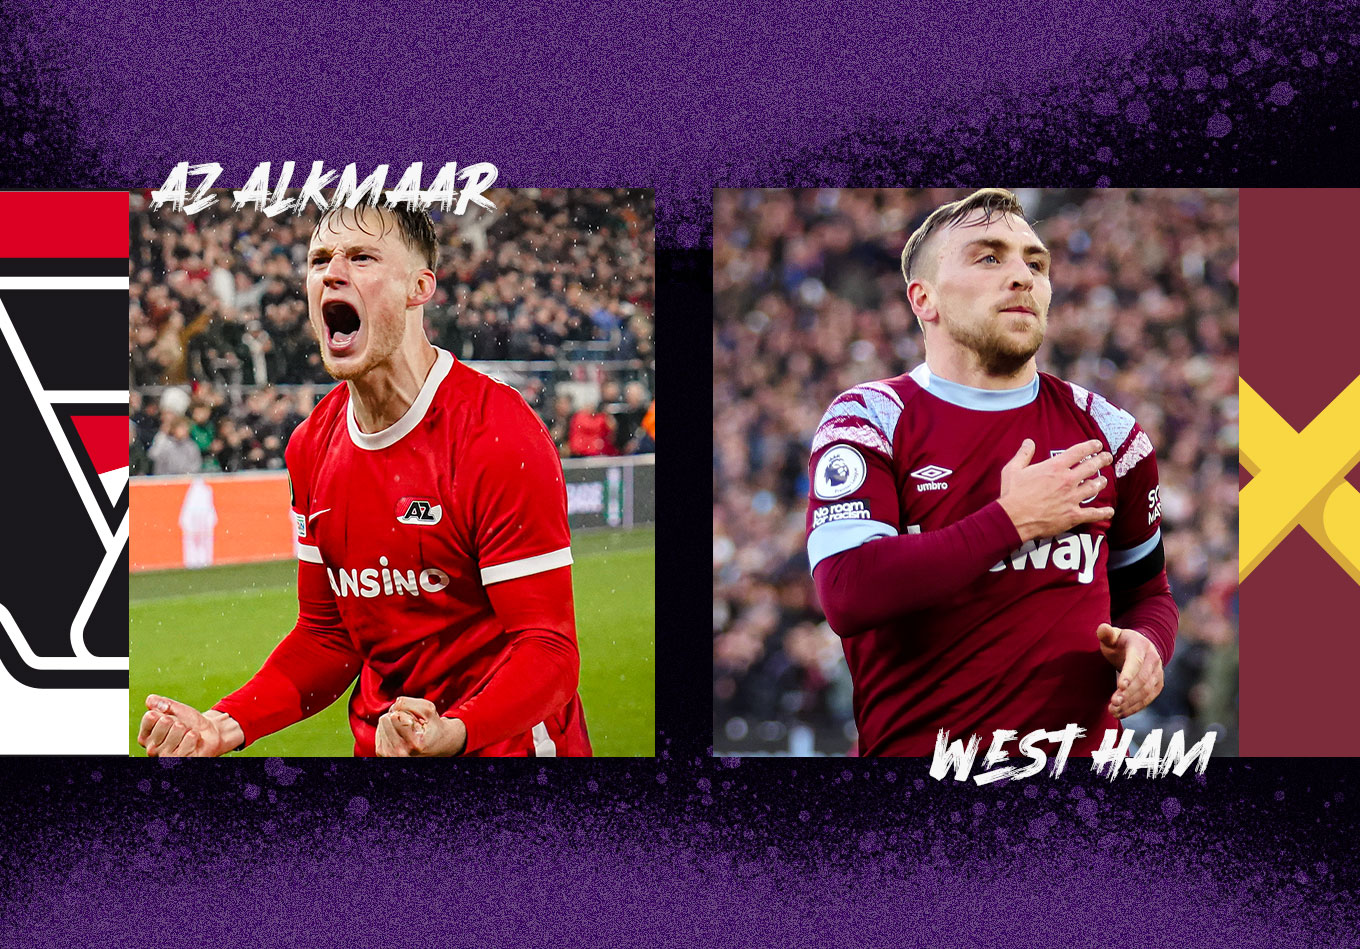 AZ Alkmaar vs West Ham Prediction and Preview | The Analyst